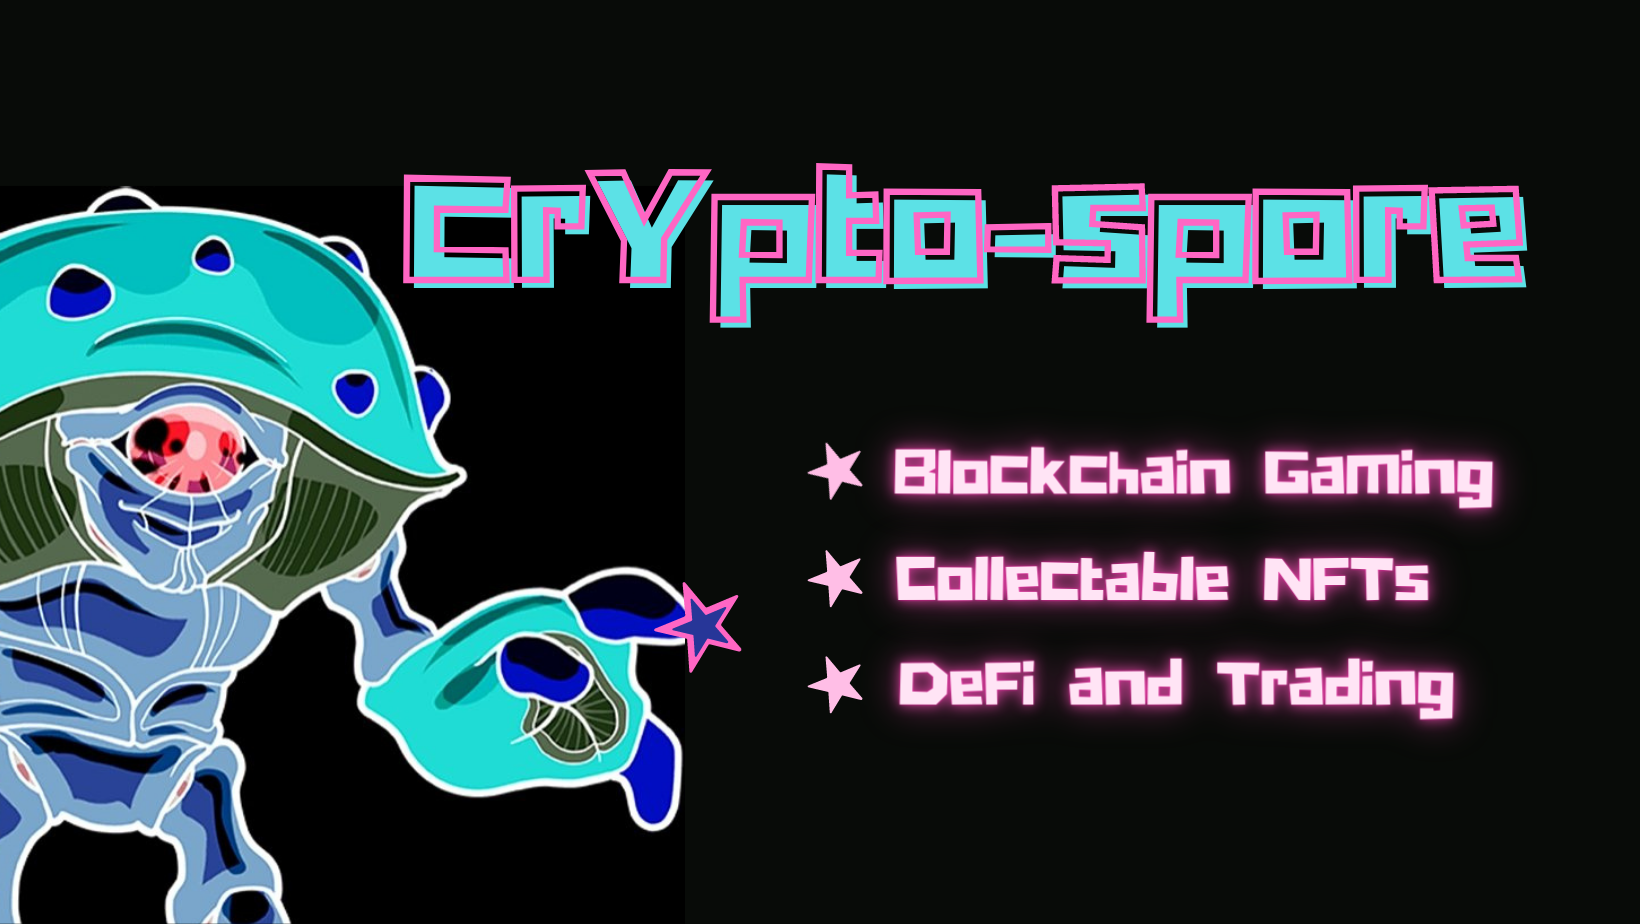 Crypto-Spore Cover Image.png